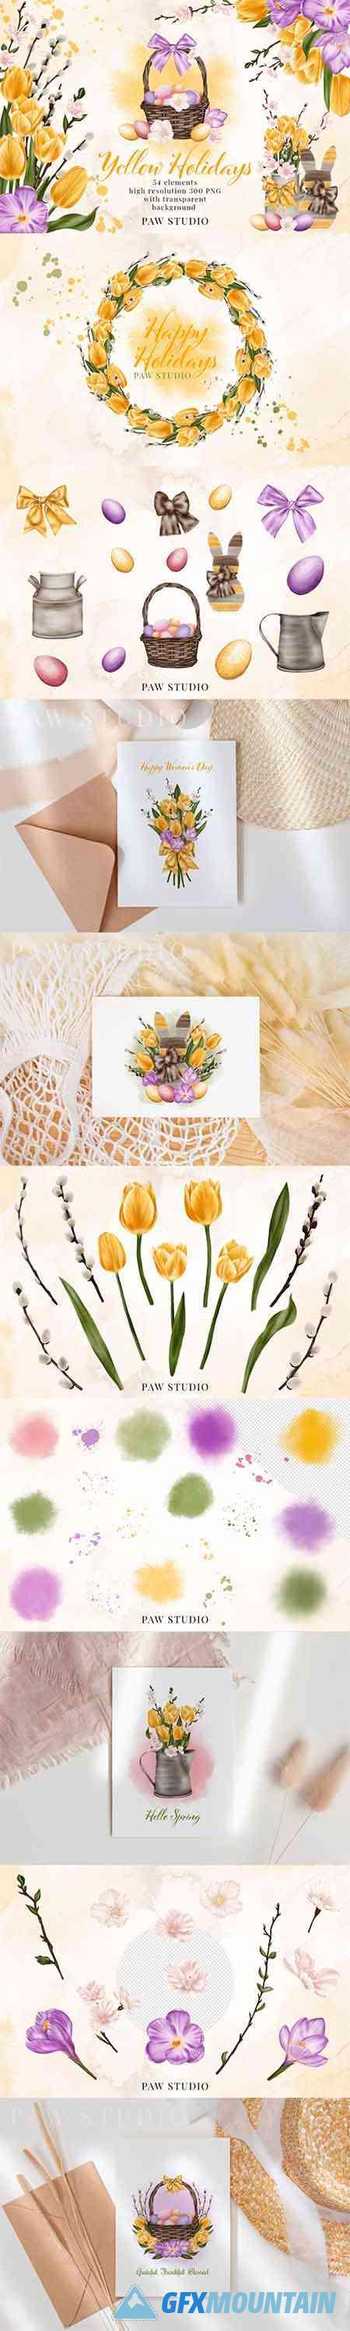 Easter Spring Clipart Yellow Tulips Willow Twigs Basket Eggs - 1187914